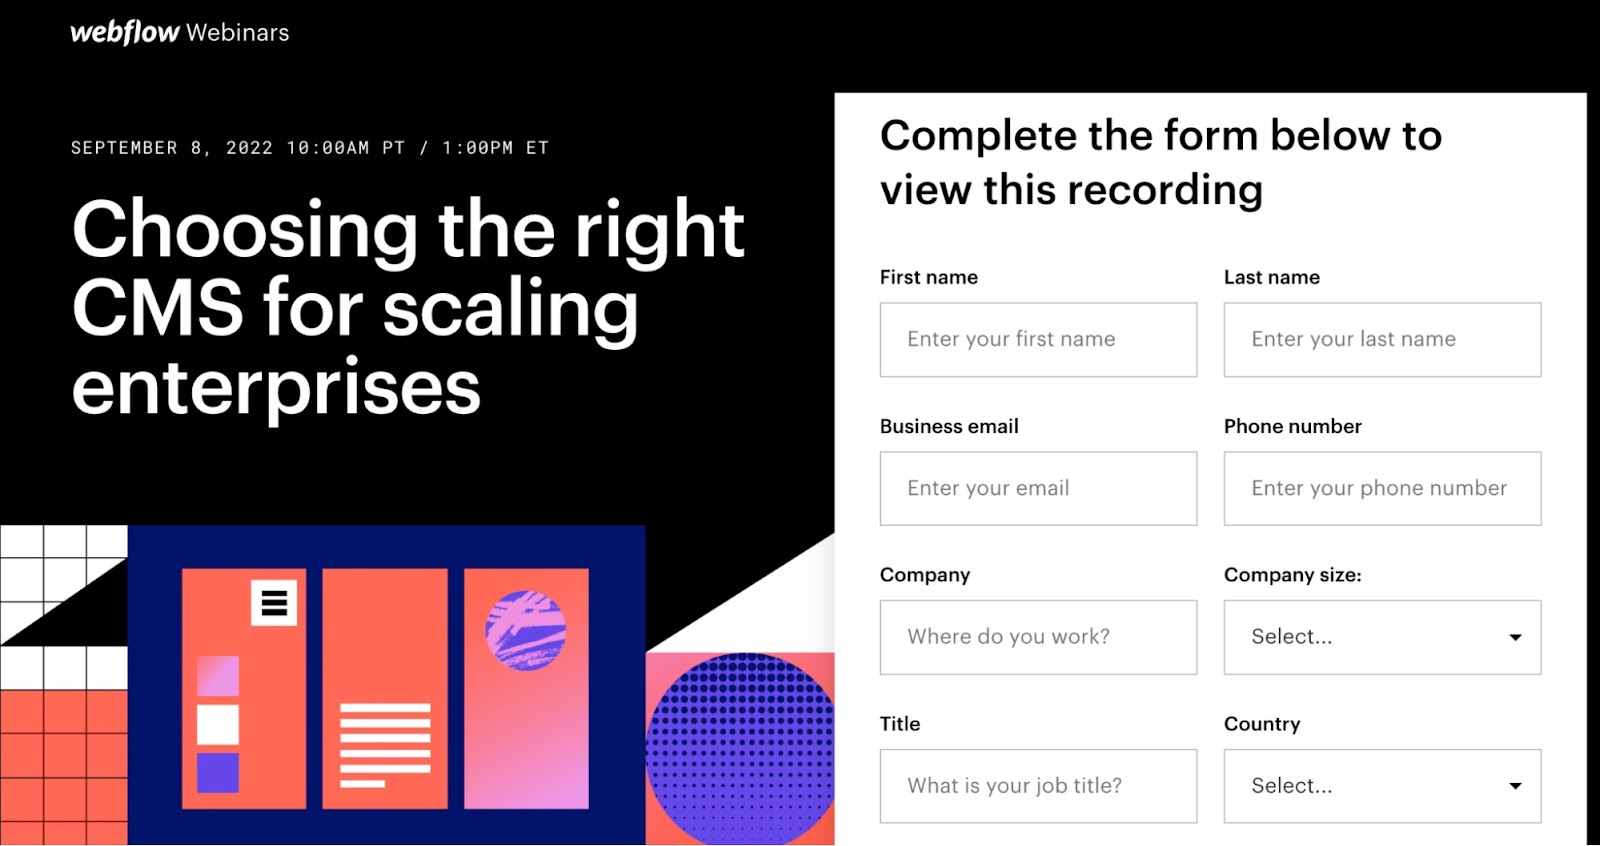 Webflow's "Choosing the right CMS for scaling enterprises" landing page with a form